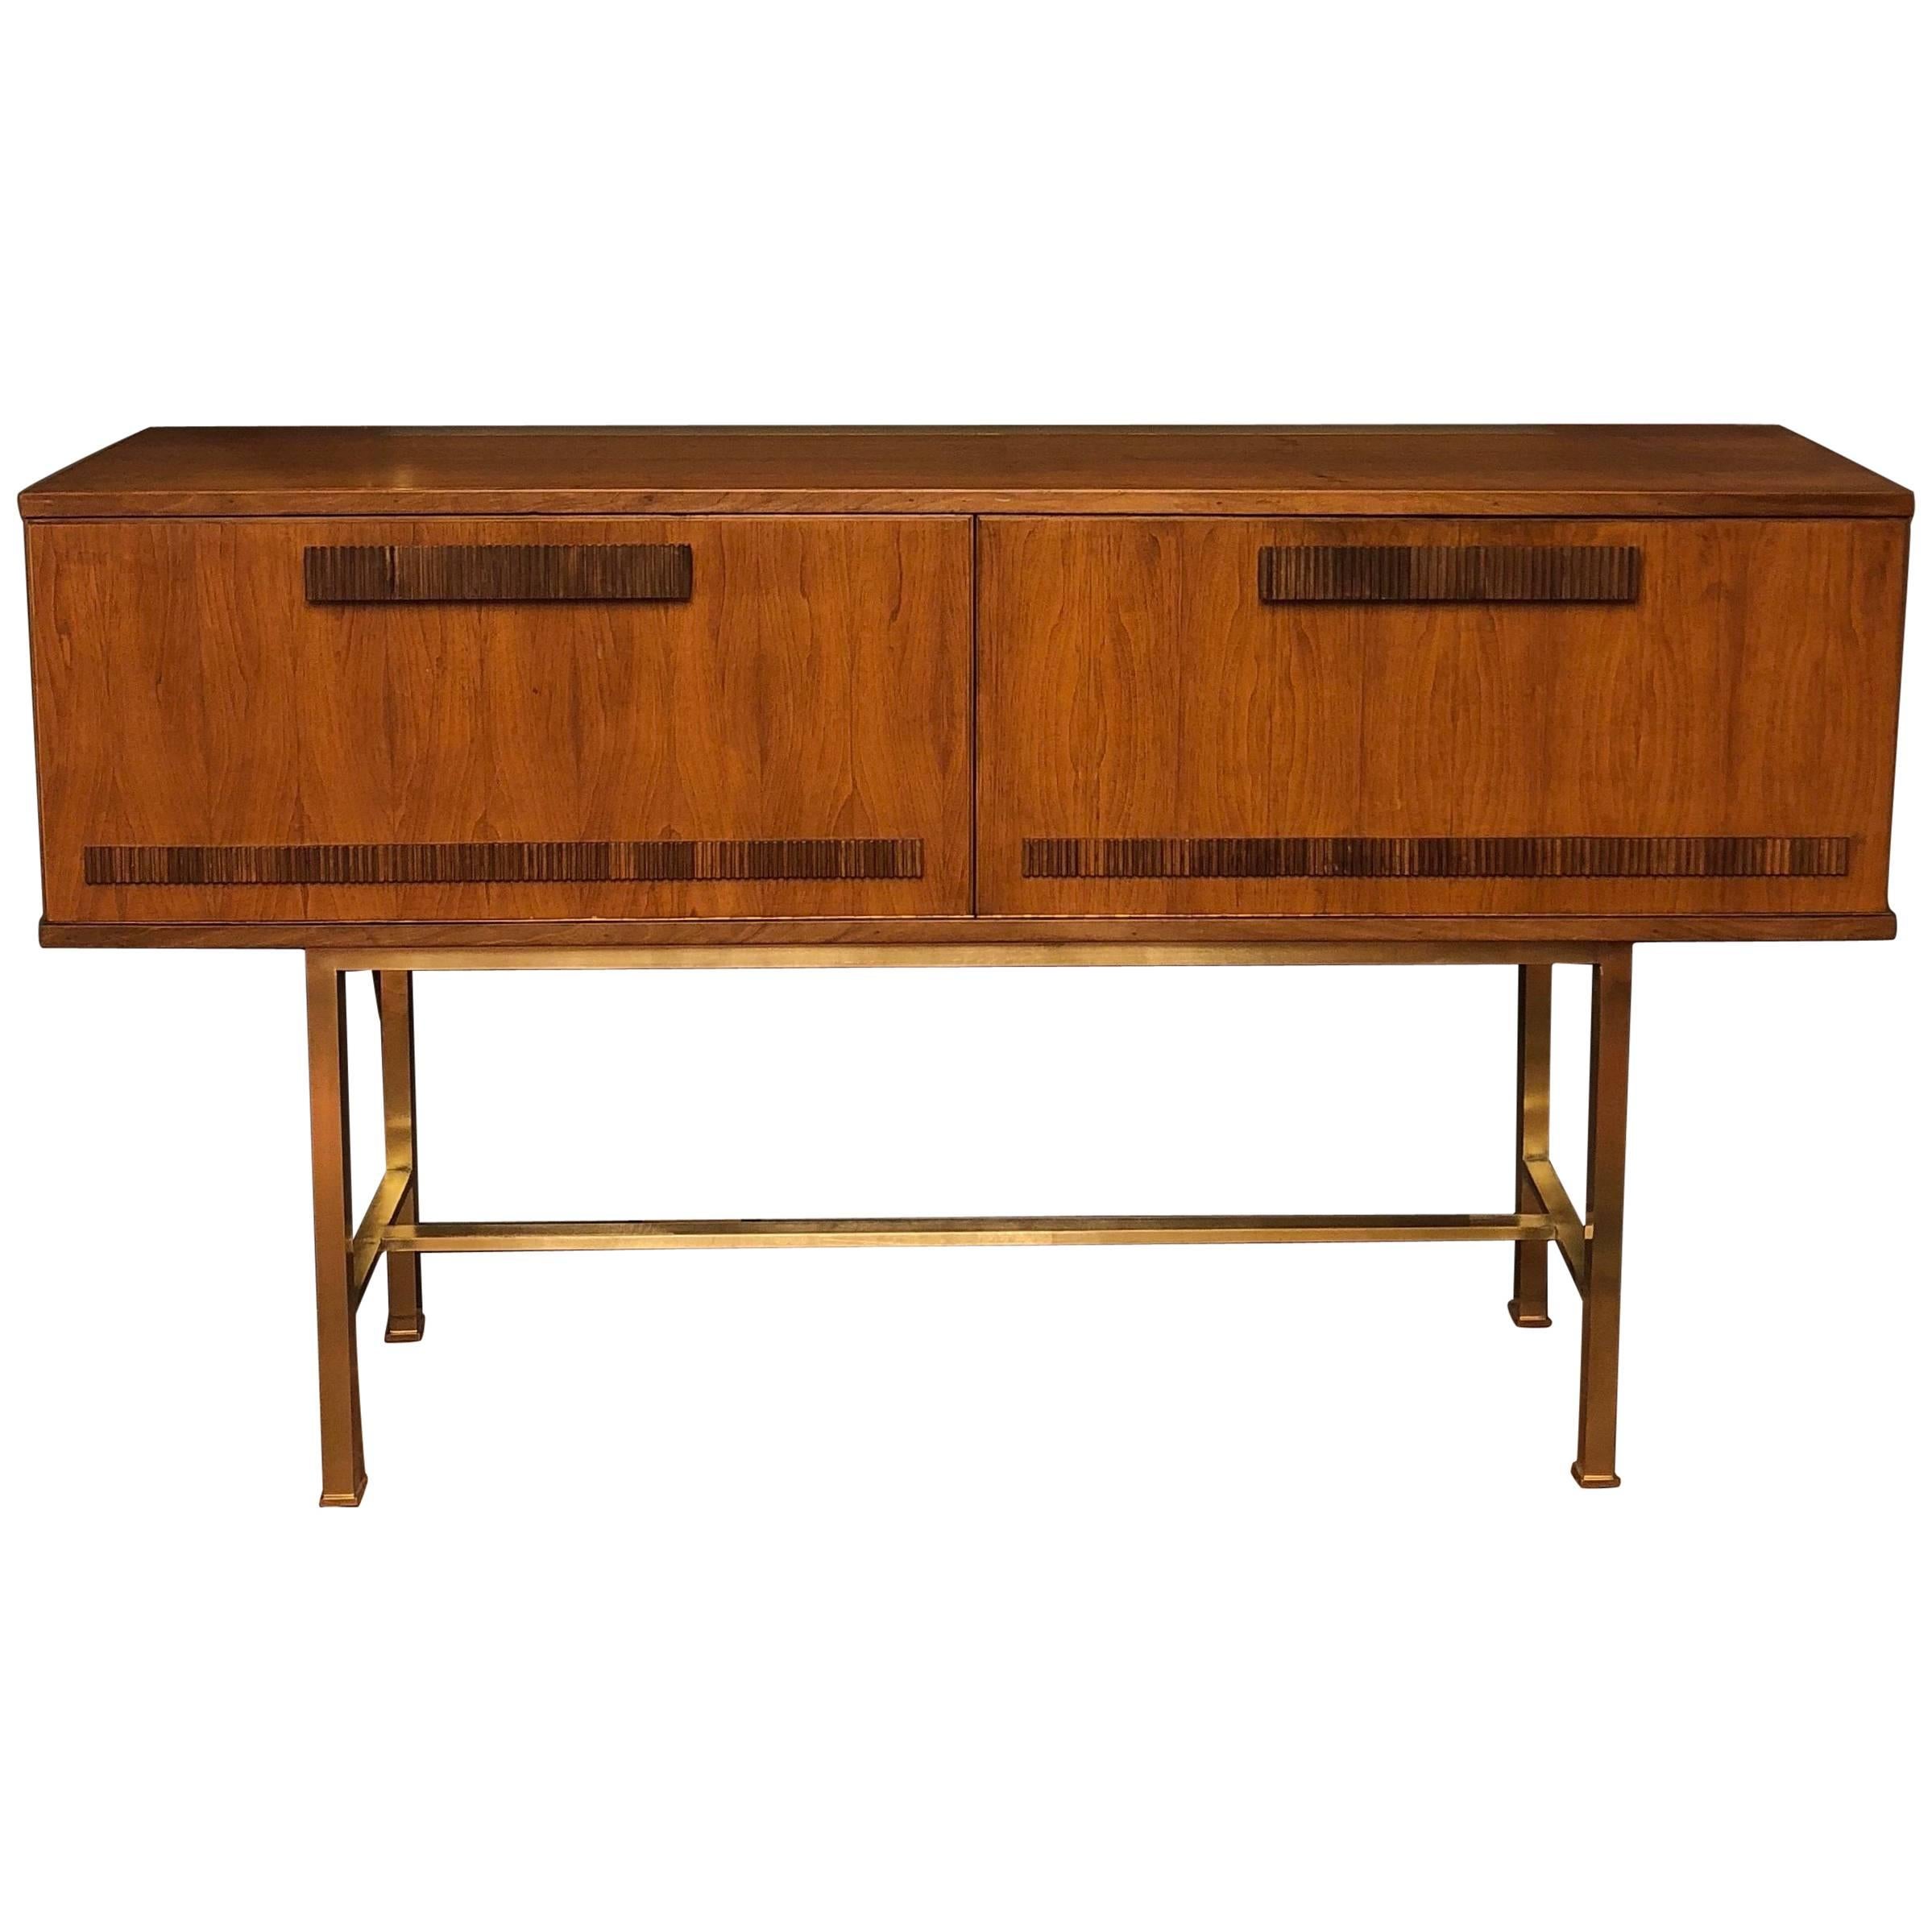 Mid-Century Modern Italian Oak Credenza with Two Doors and Brass Legs